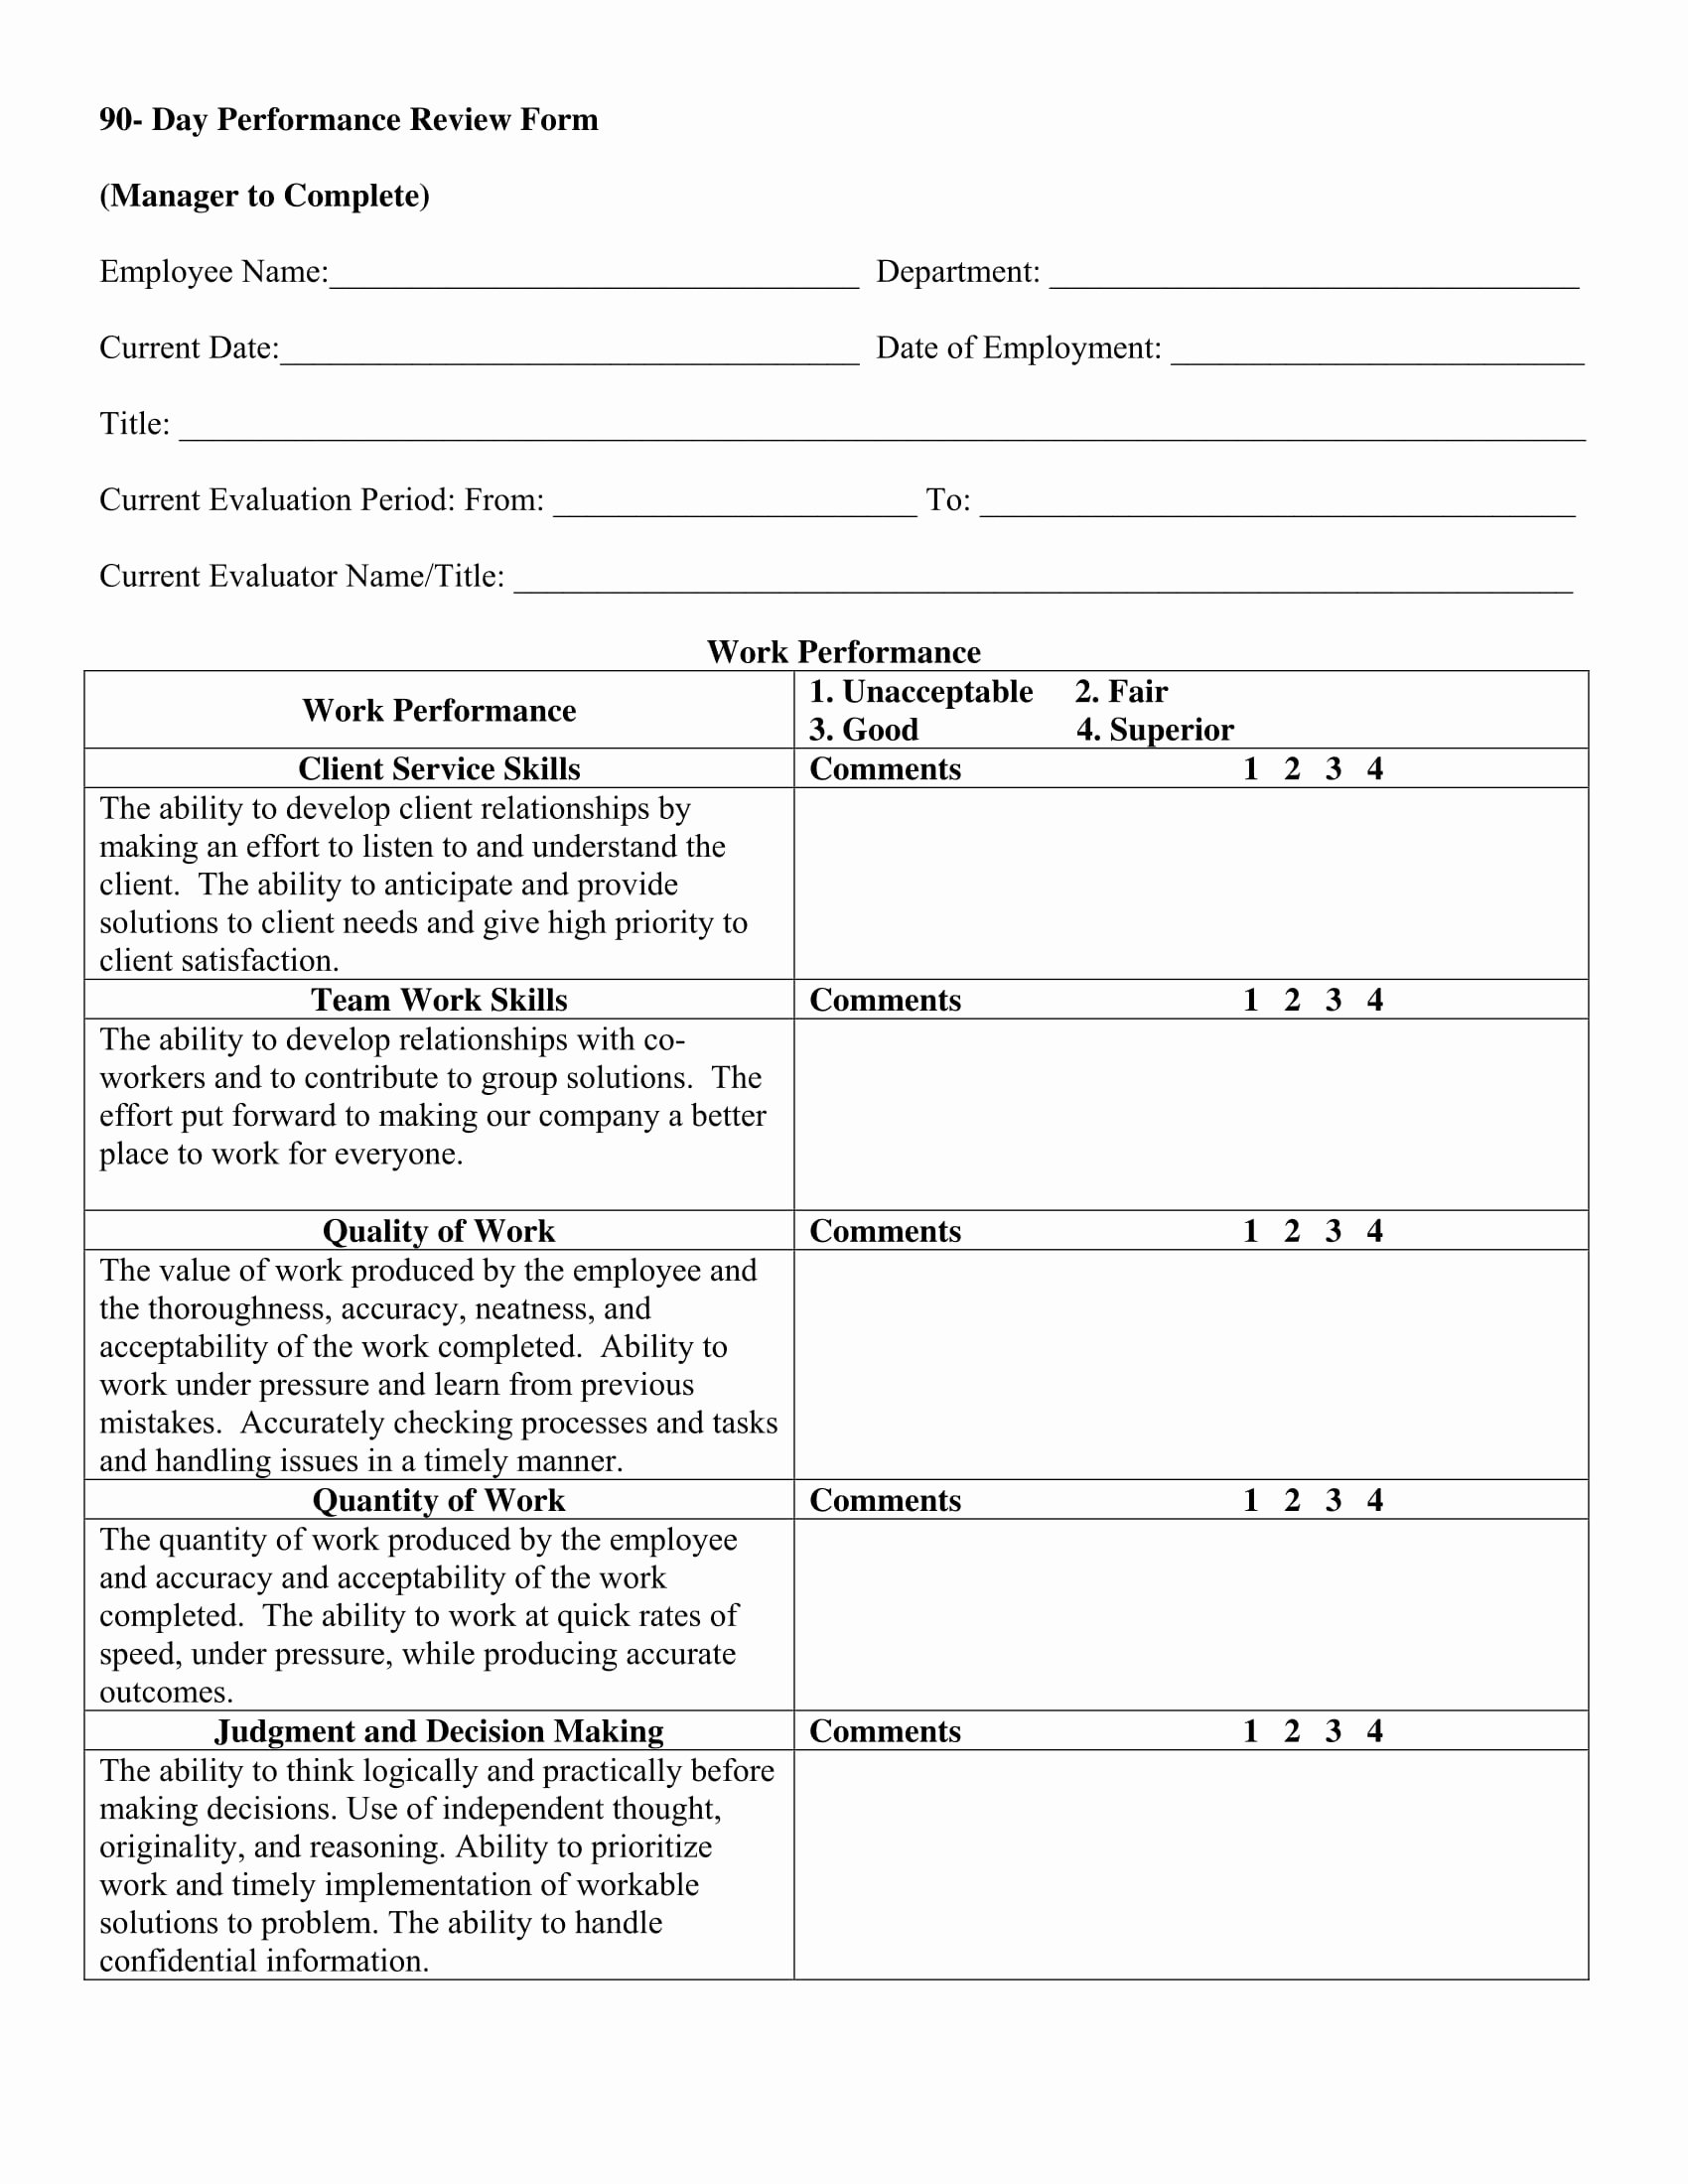 Monthly Performance Review Template Inspirational 14 90 Day Review forms Free Word Pdf format Download